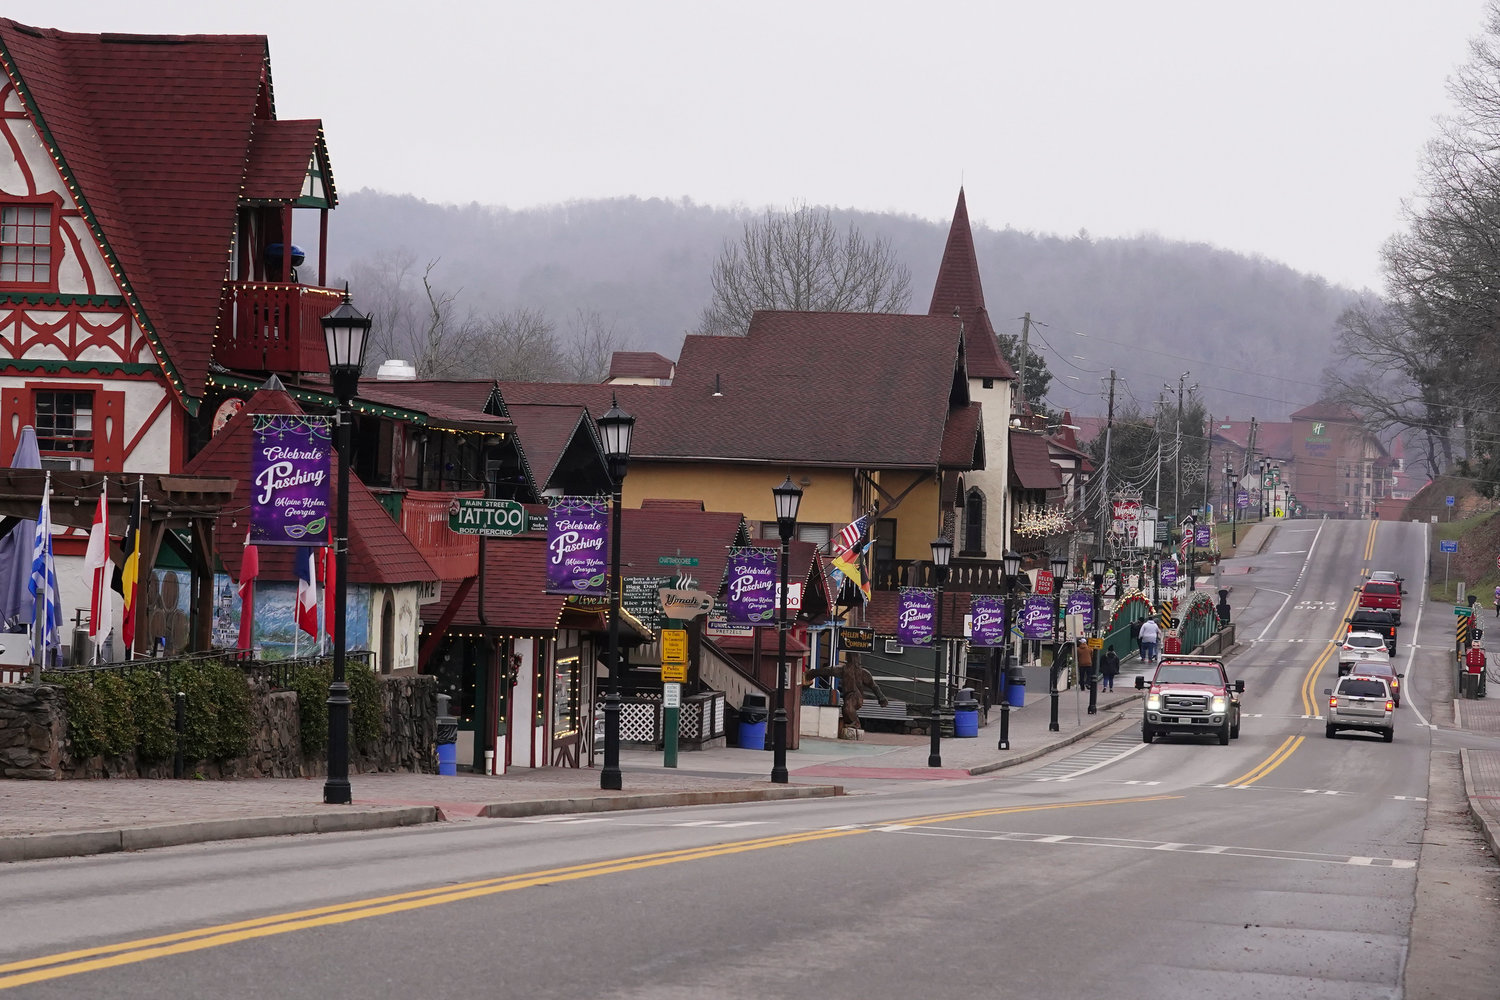 Downtown Helen, Ga., is shown Friday, Jan. 21, 2022. Helen is located in White County, lin the foothills of the Blue Ridge Mountains in northeast Georgia, where officials were stunned when the 2020 census said the county had 28,003 residents. A Census Bureau estimate from 2019 had put the county's population at 30,798 people. (AP Photo/John Bazemore)